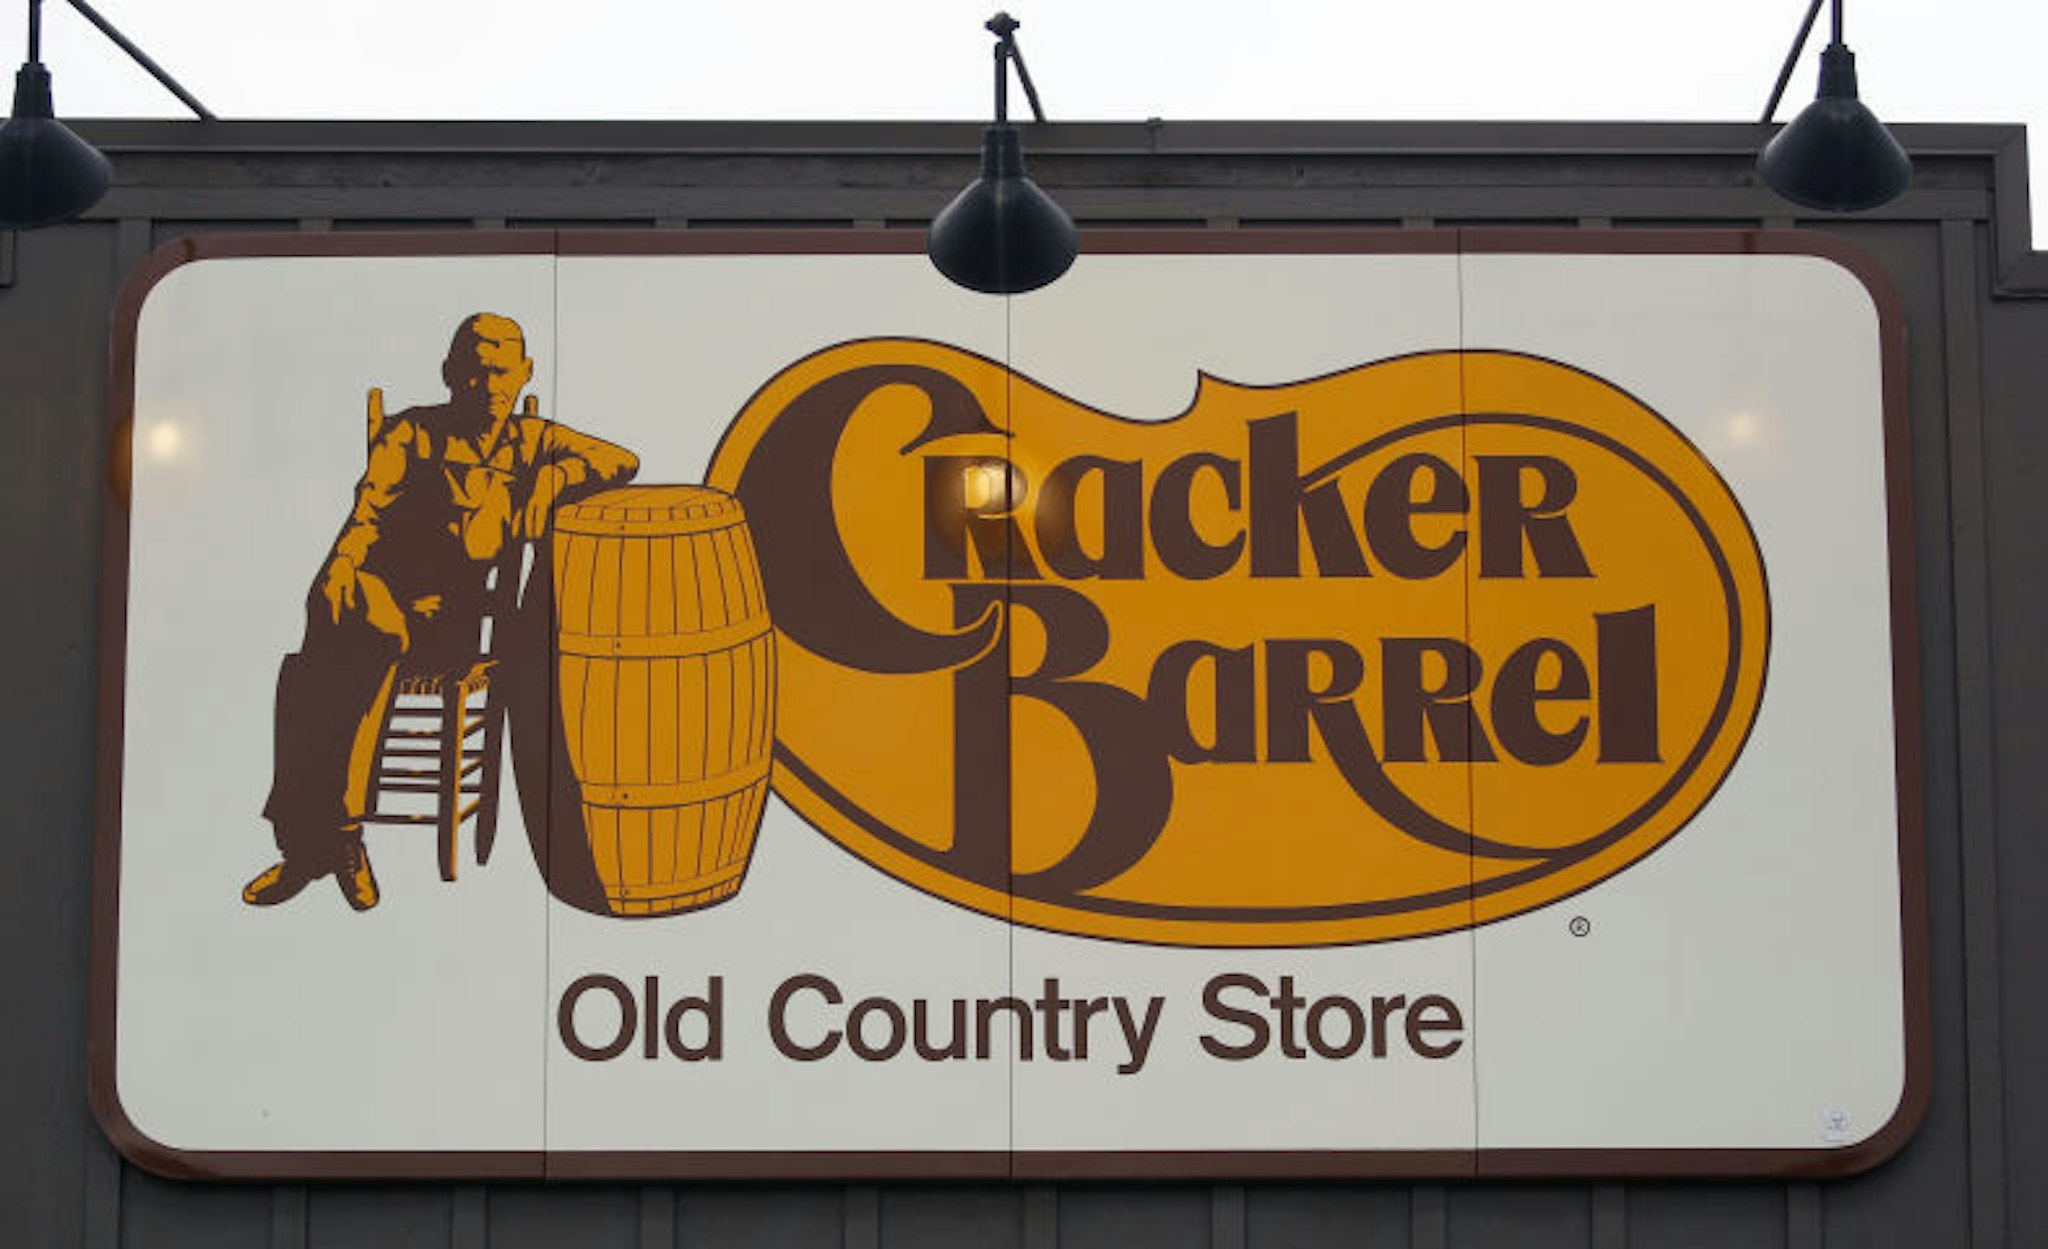 Signage is displayed outside a Cracker Barrel Old Country Store Inc. restaurant and gift shop in Louisville, Kentucky, U.S., on Monday, Sept. 23, 2019. Cracker Barrel is scheduled to release earnings figures on November 26. Photographer: Luke Sharrett/Bloomberg via Getty Images